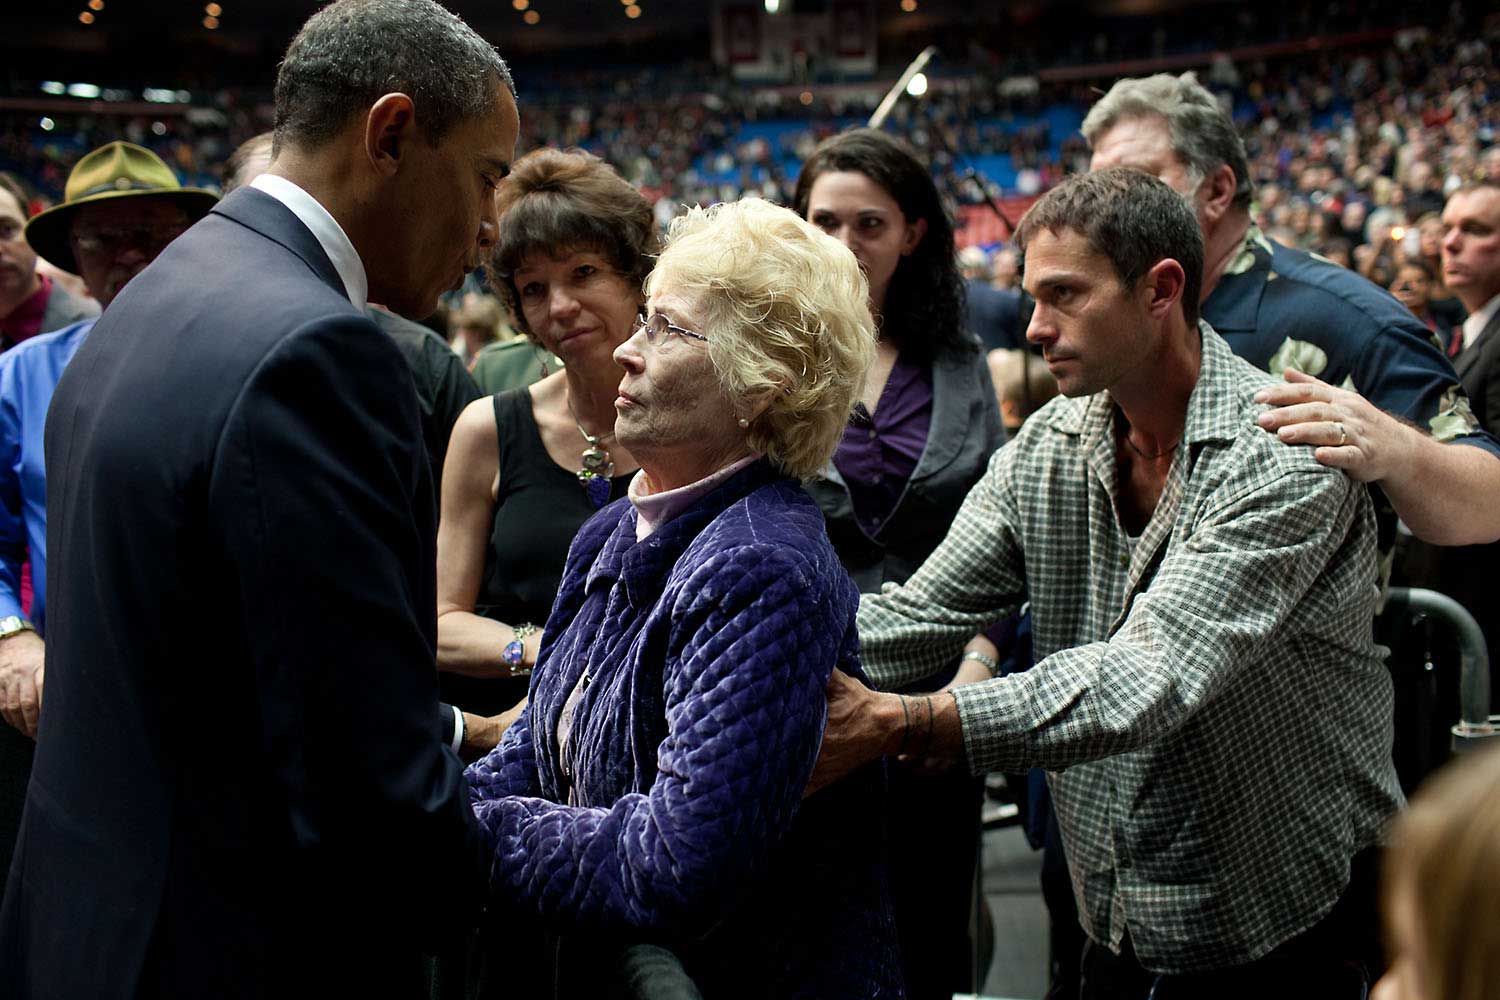 "A terrible tragedy occurred on a Saturday in January when a gunman shot Rep. Gabrielle Giffords and 18 others in Tucson, Ariz. A few days later, on Jan. 12, 2011, the President spoke at a memorial service for the six victims who died and those wounded. Here he greets Mavy Stoddard, whose husband Dorwan died while protecting her during the shooting."